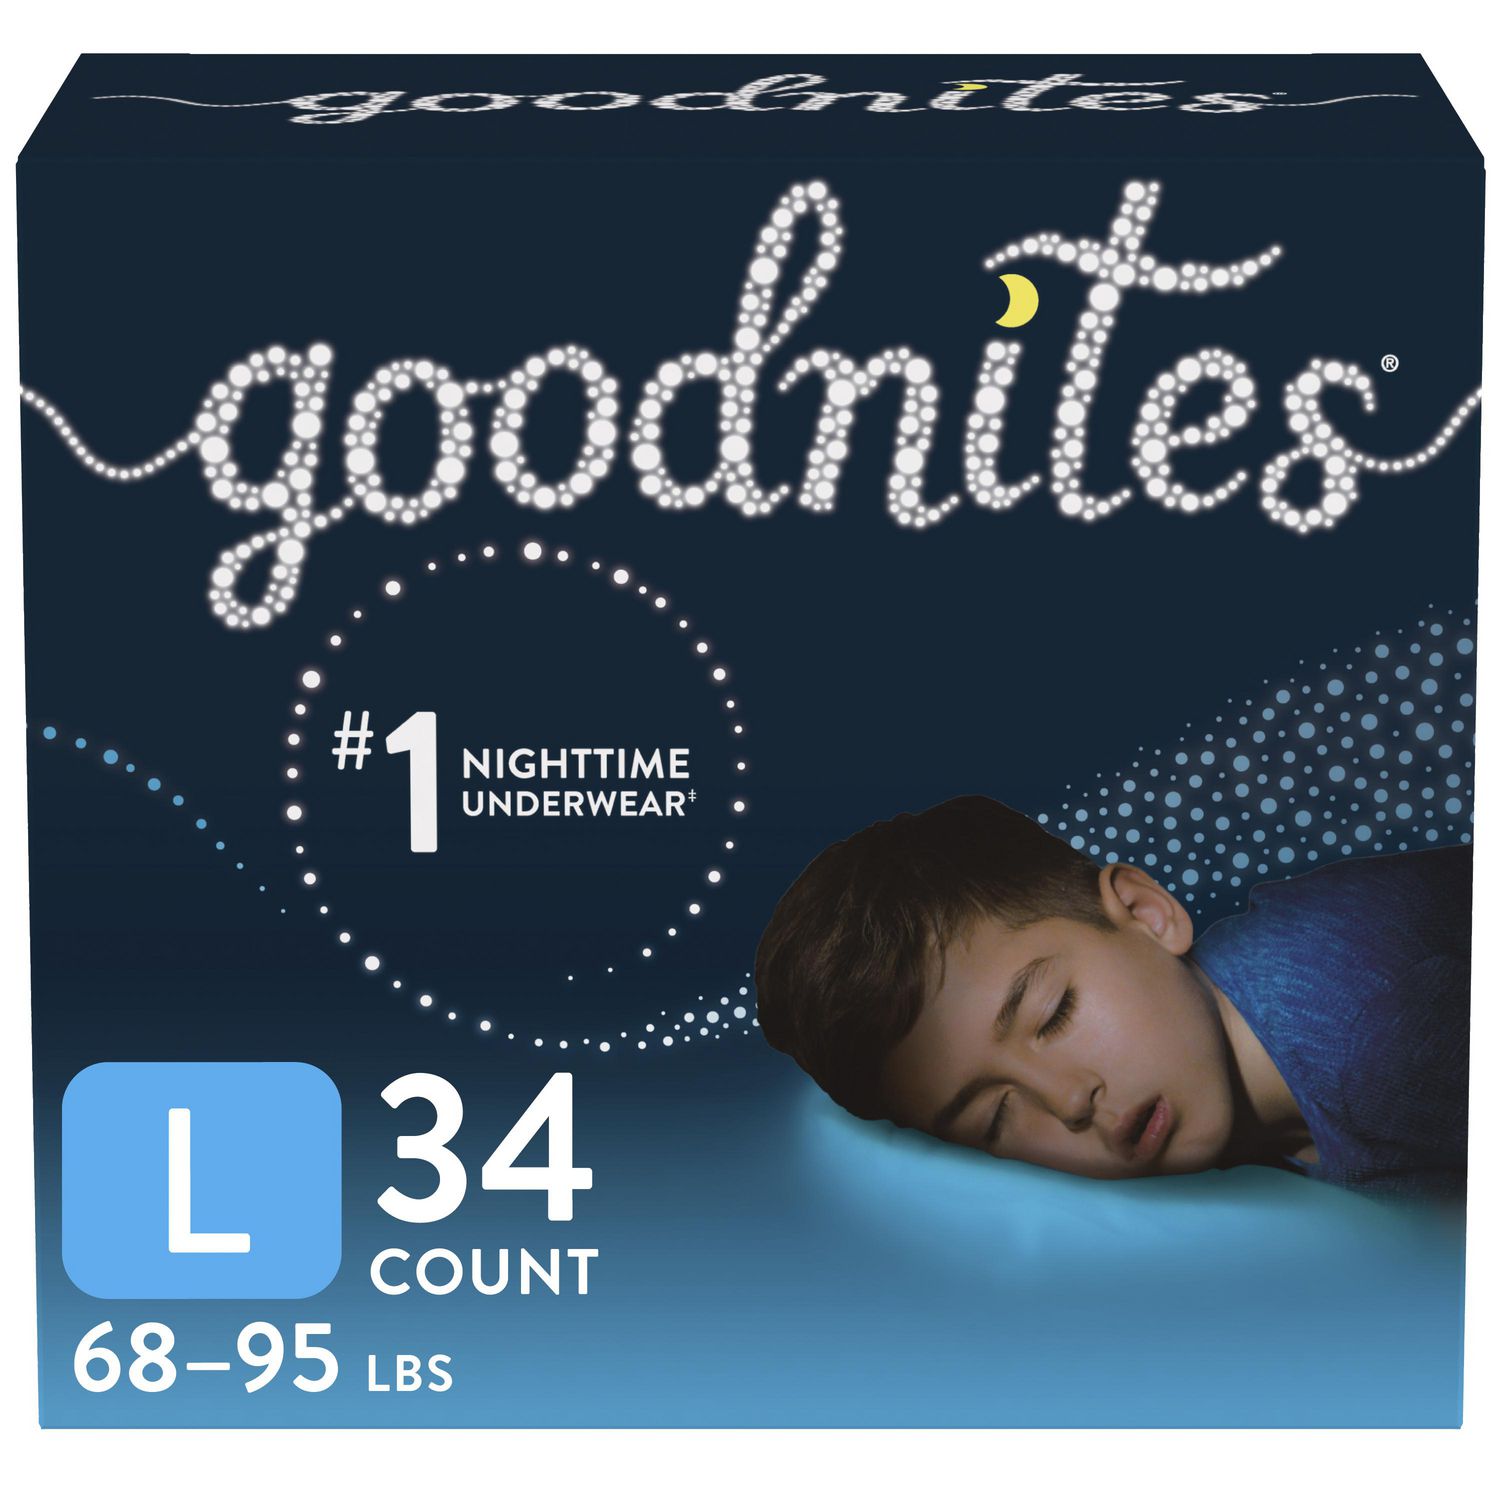  Goodnites Boys' Nighttime Bedwetting Underwear, Size Large  (68-95 lbs), 34 Ct (2 Packs of 17), Packaging May Vary : Health & Household